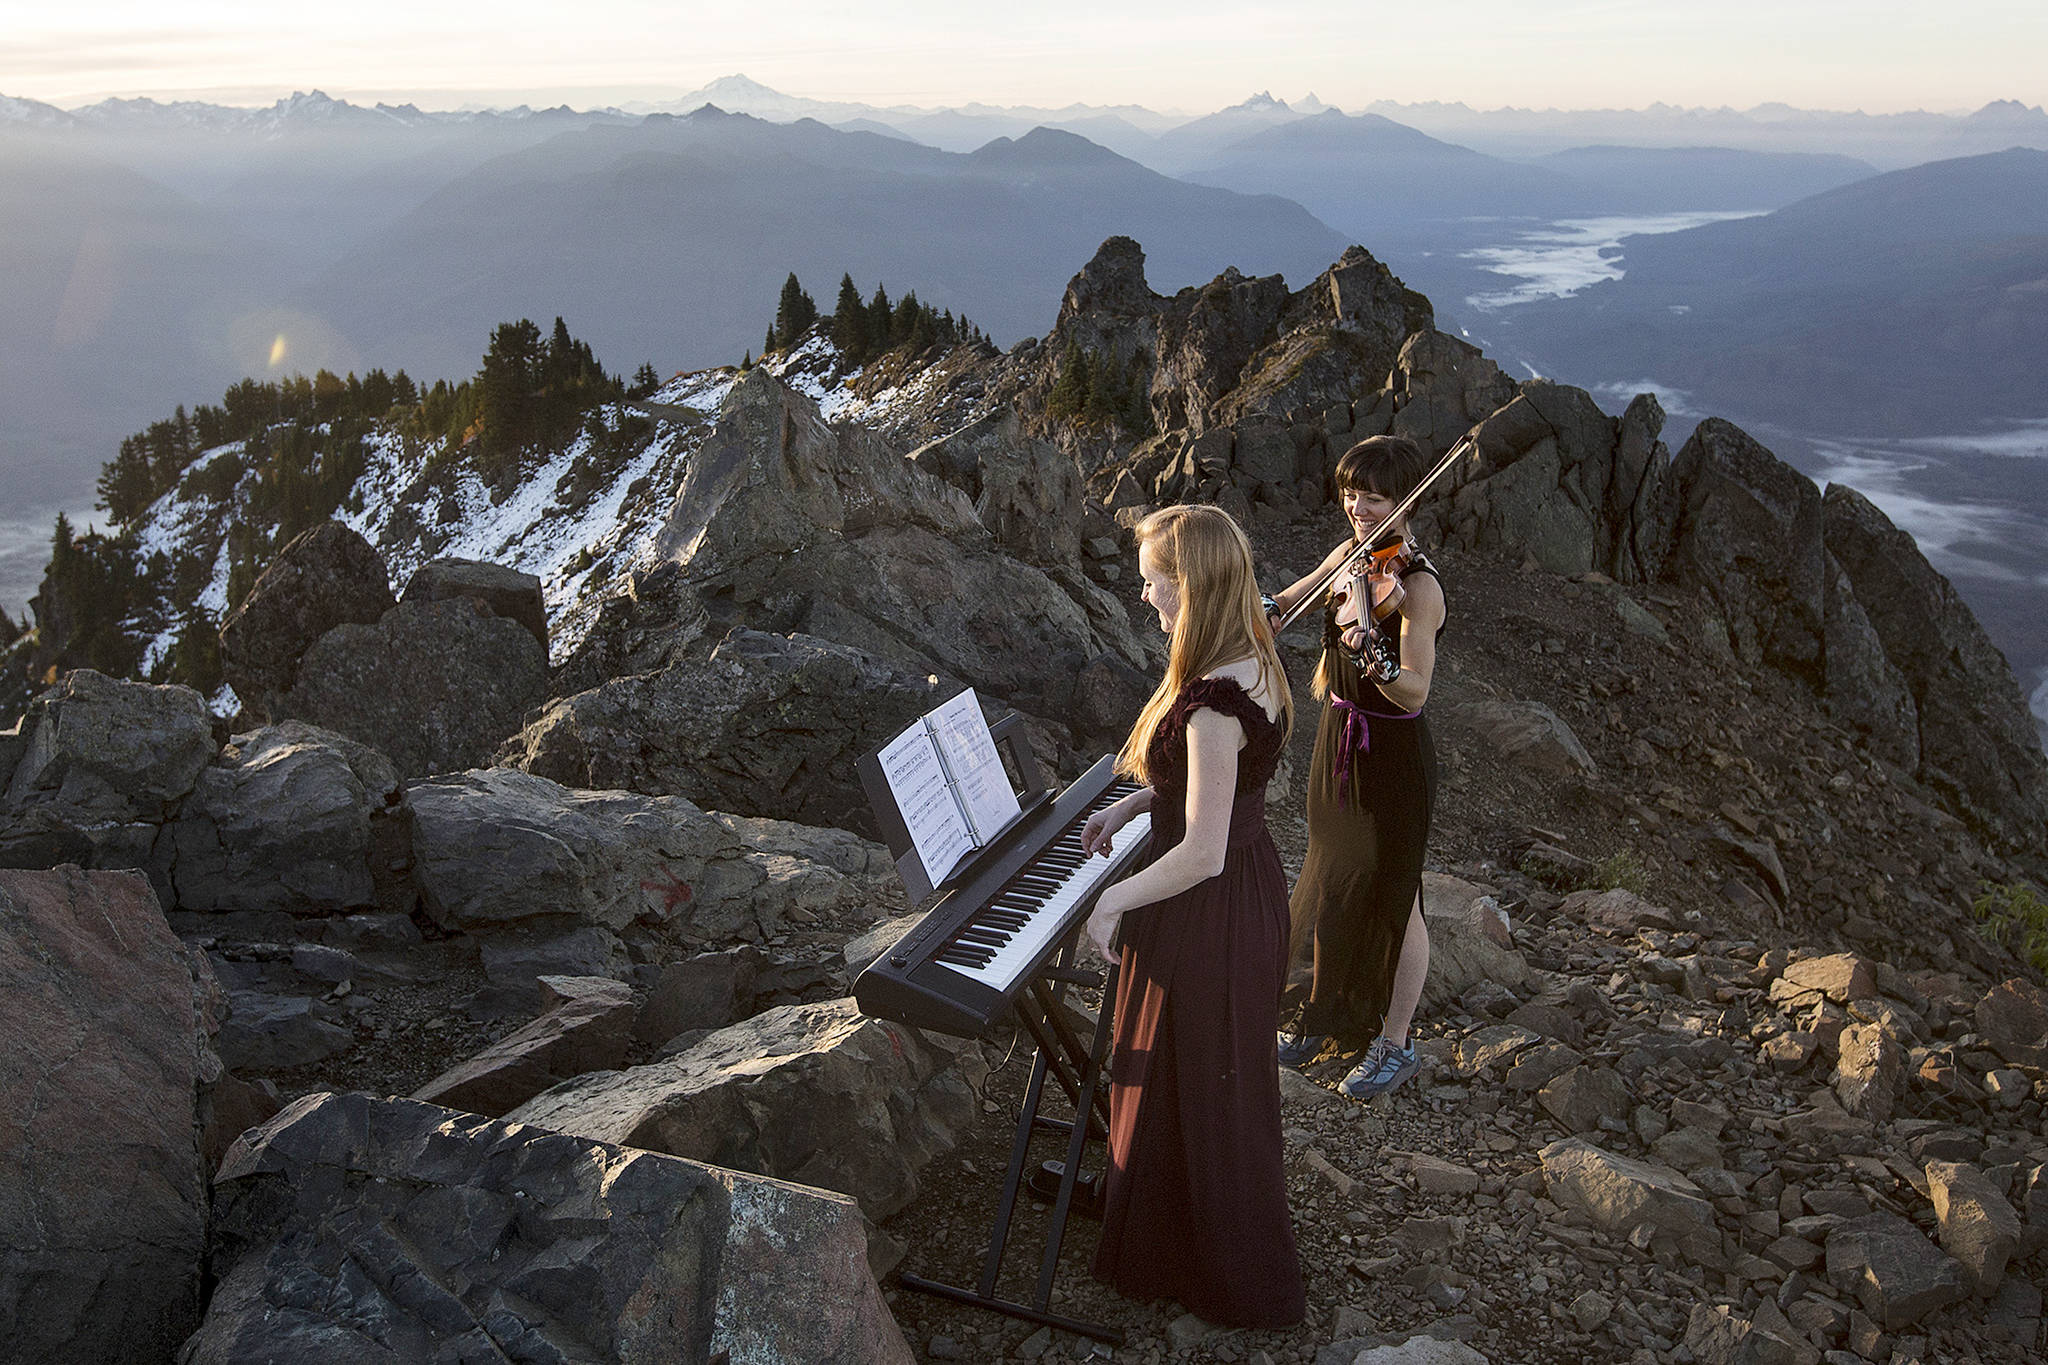 Rose Freeman (center) and Anastasia Allison play atop Sauk Mountain near Concrete on Oct. 5. The pair play violin and piano together at sunrise across the Cascades under the name The Musical Mountaineers. (Ian Terry / The Herals)